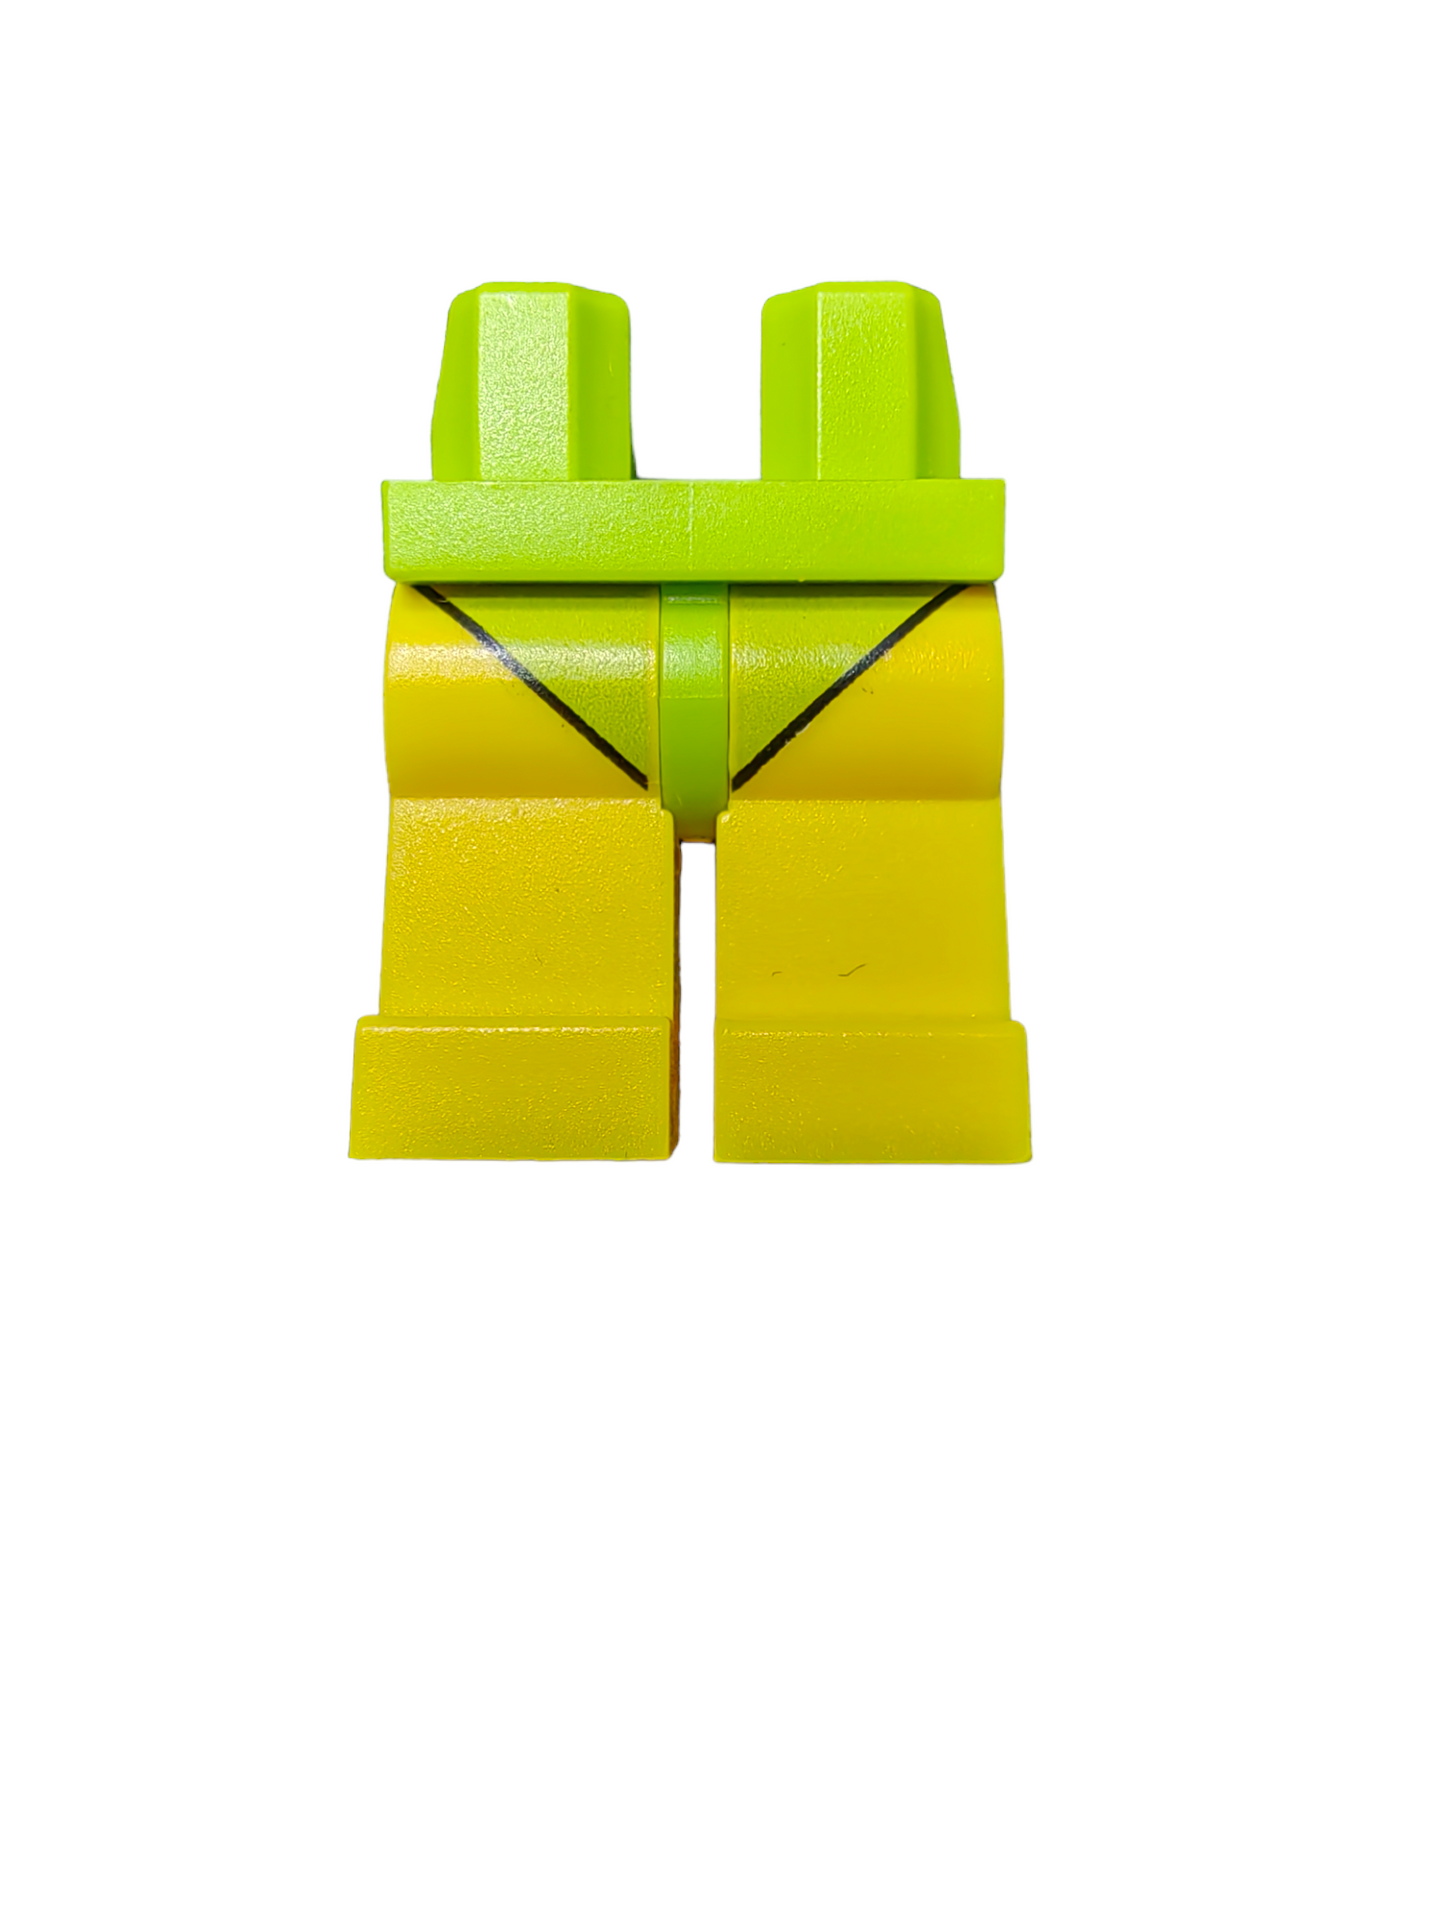 Minifigure Legs, Yellow with Green Swimming Trunks - UB1163